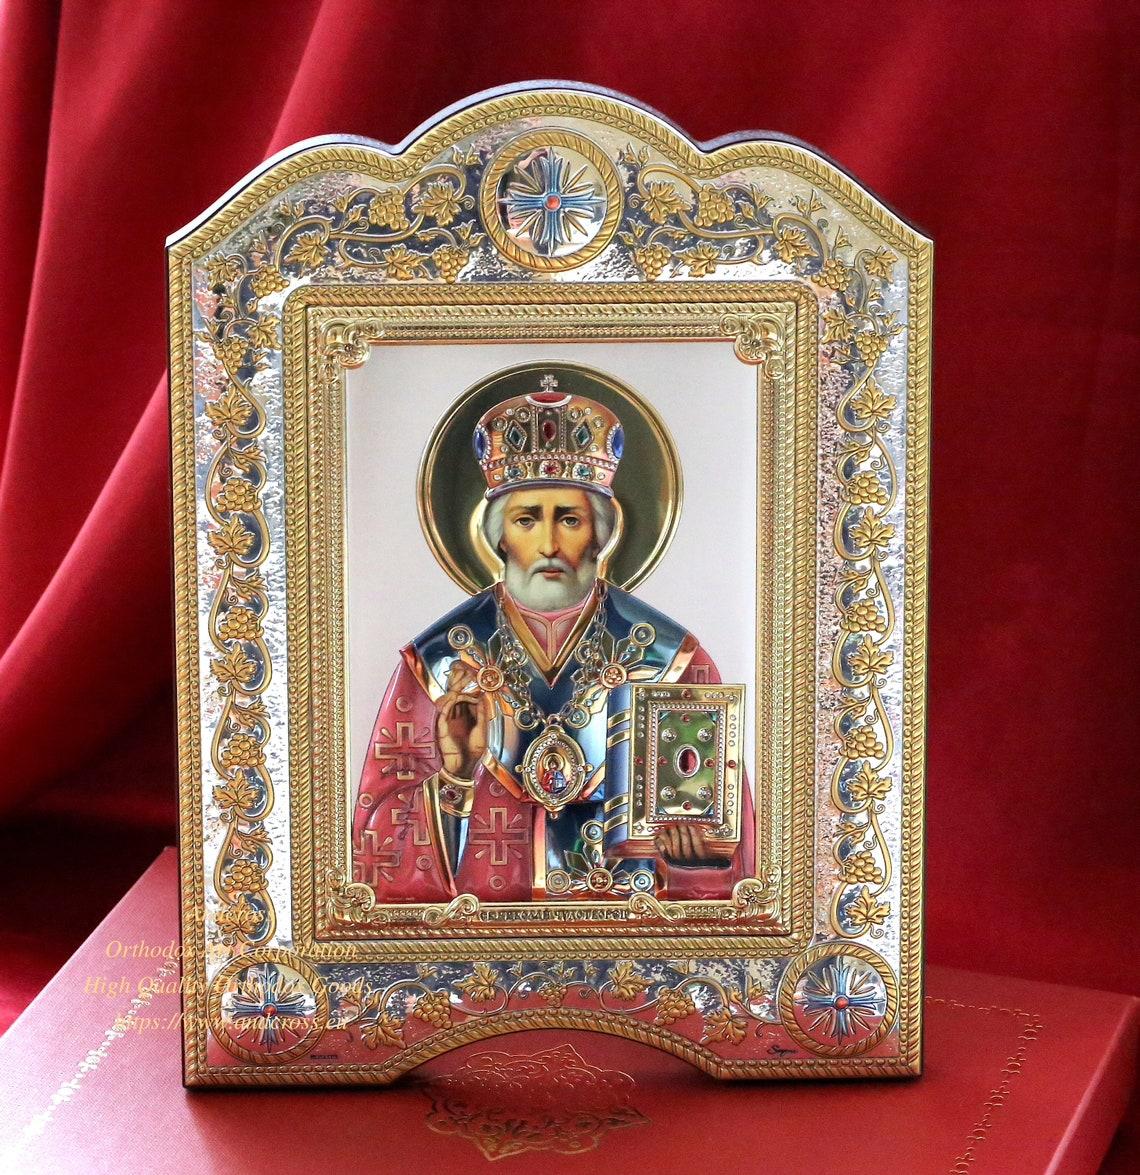 The Great Miraculous Christian Orthodox Silver Icon – The Saint Nicholas Wonderworker 21×28 Gold and silver version/Coloured version. B273|Import placeholder for 27260|Import placeholder for 27260|Import placeholder for 27260|Import placeholder for 27260|Import placeholder for 27260|Import placeholder for 27260|Import placeholder for 27260|Import placeholder for 27260